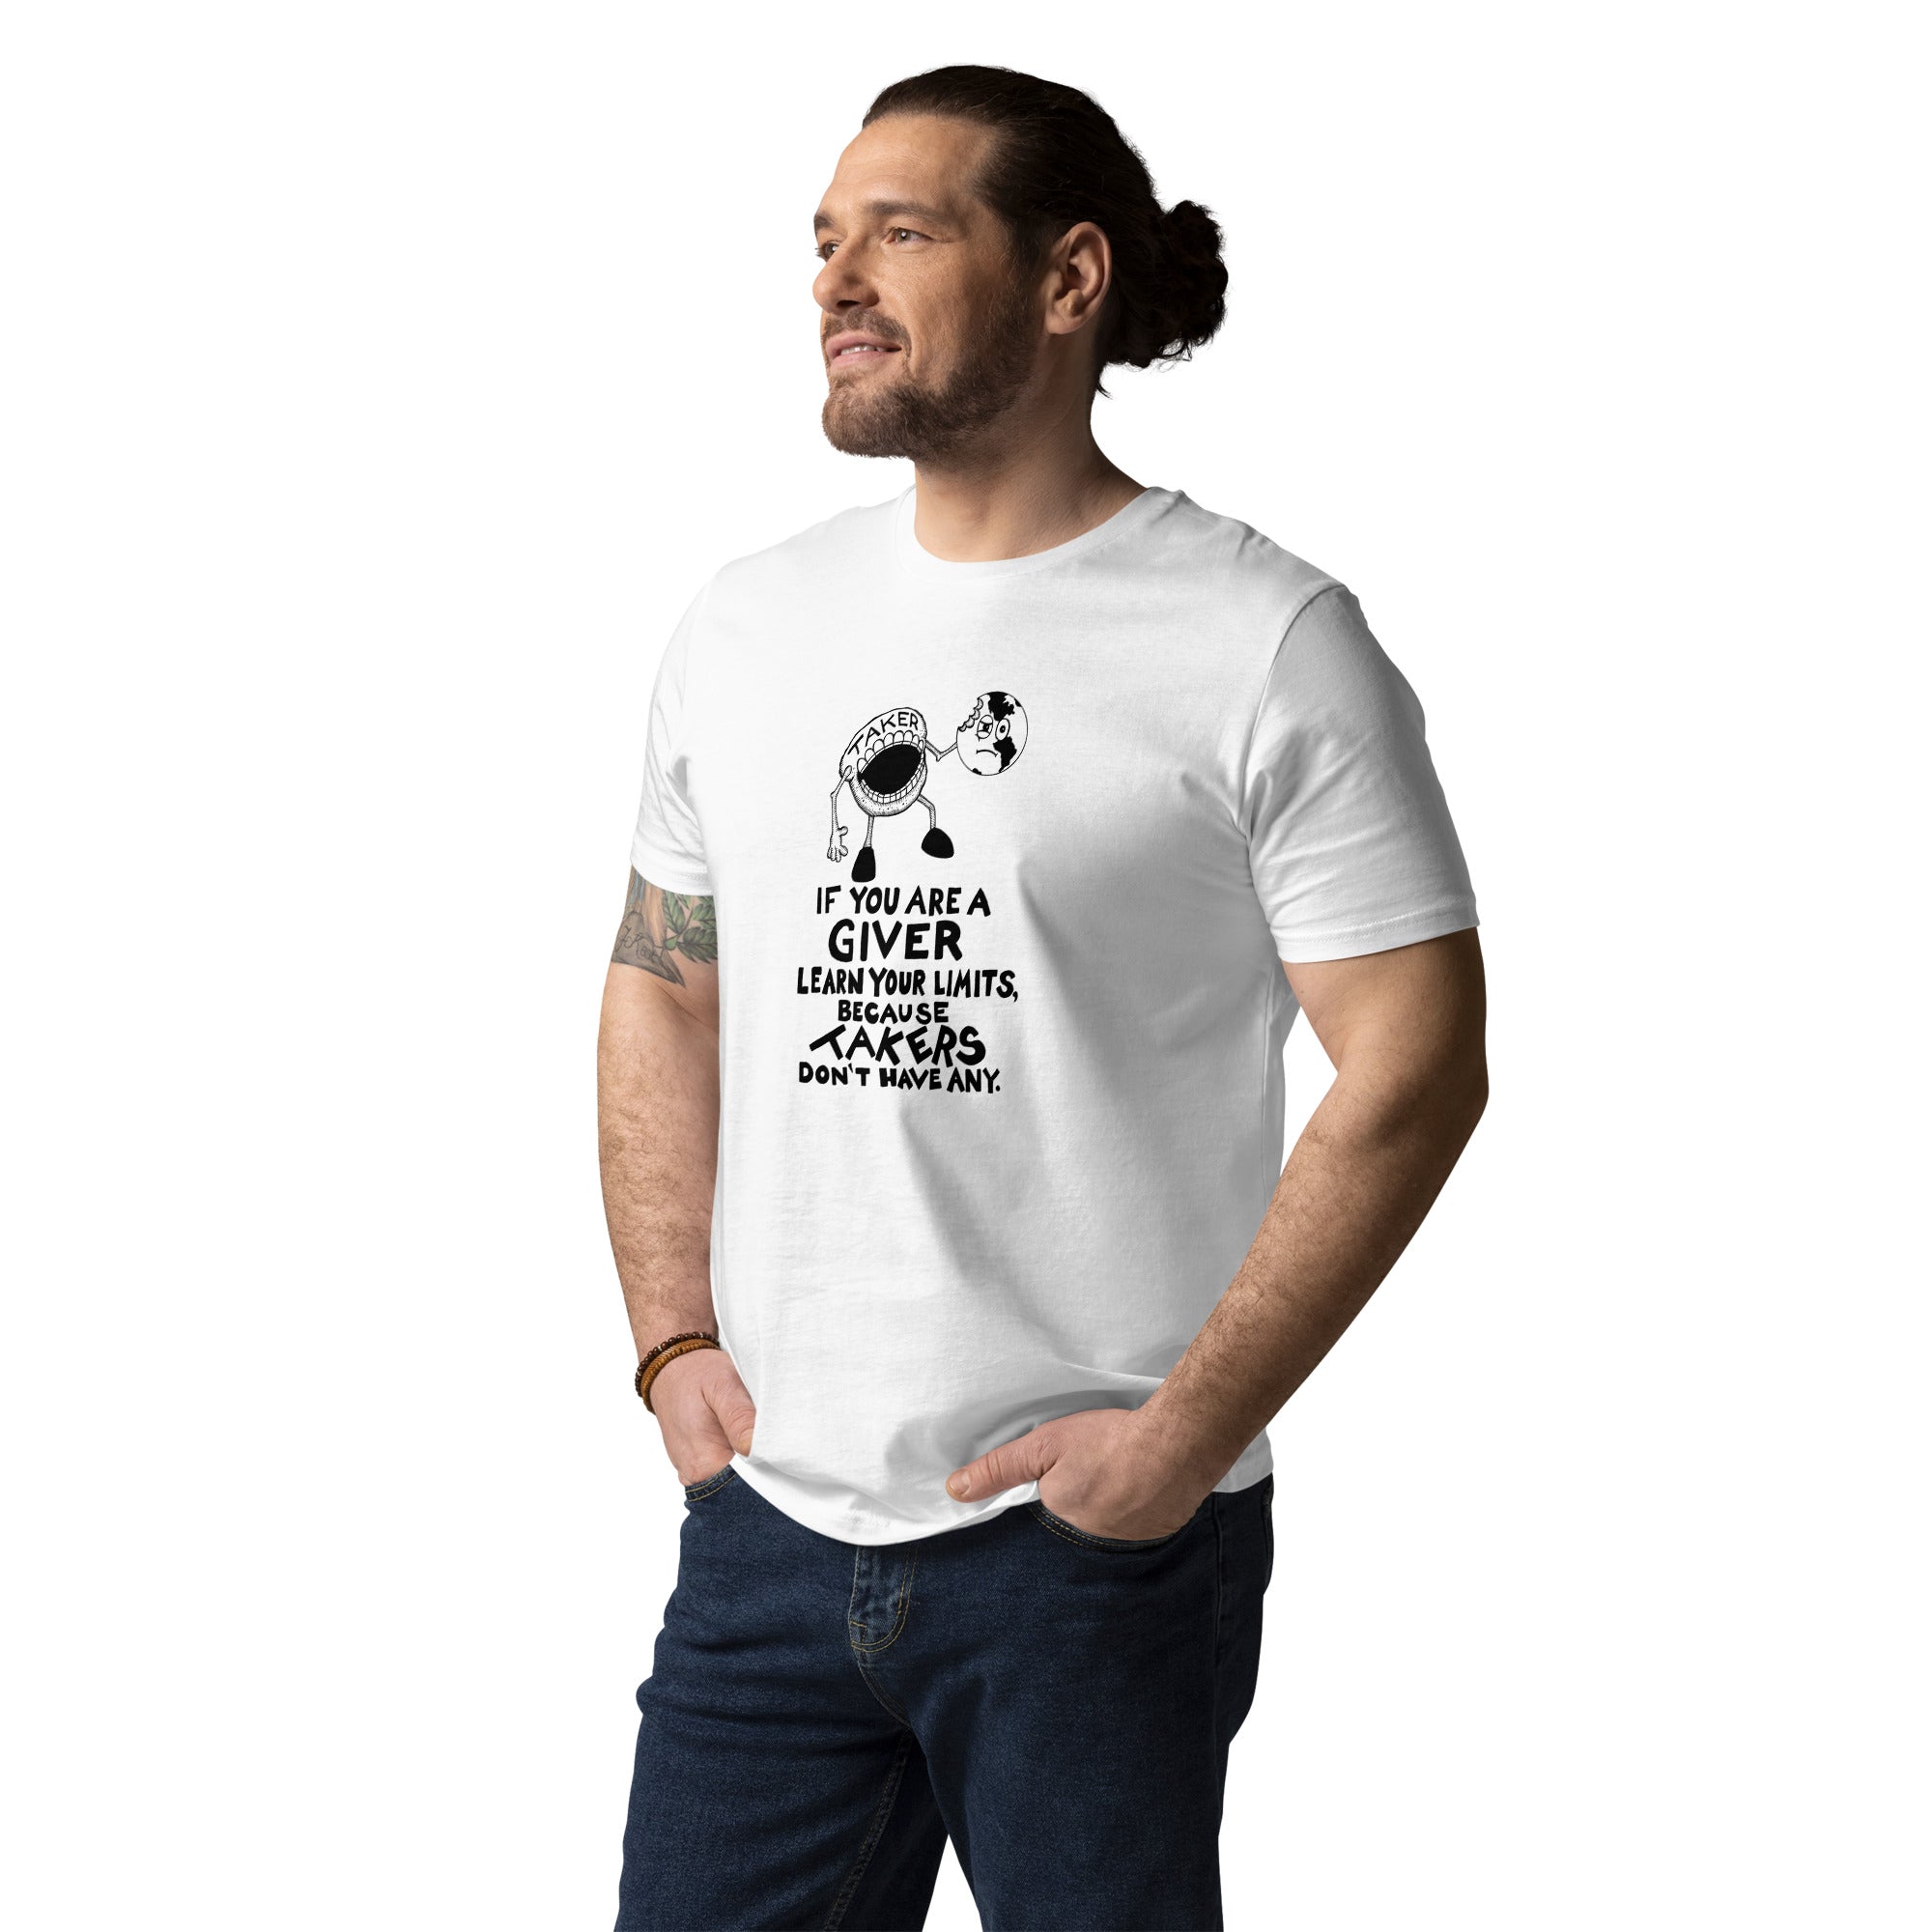 The Taker Organic Cotton Gender Neutral Crew Neck T-Shirt In White by Artist Rick Frausto